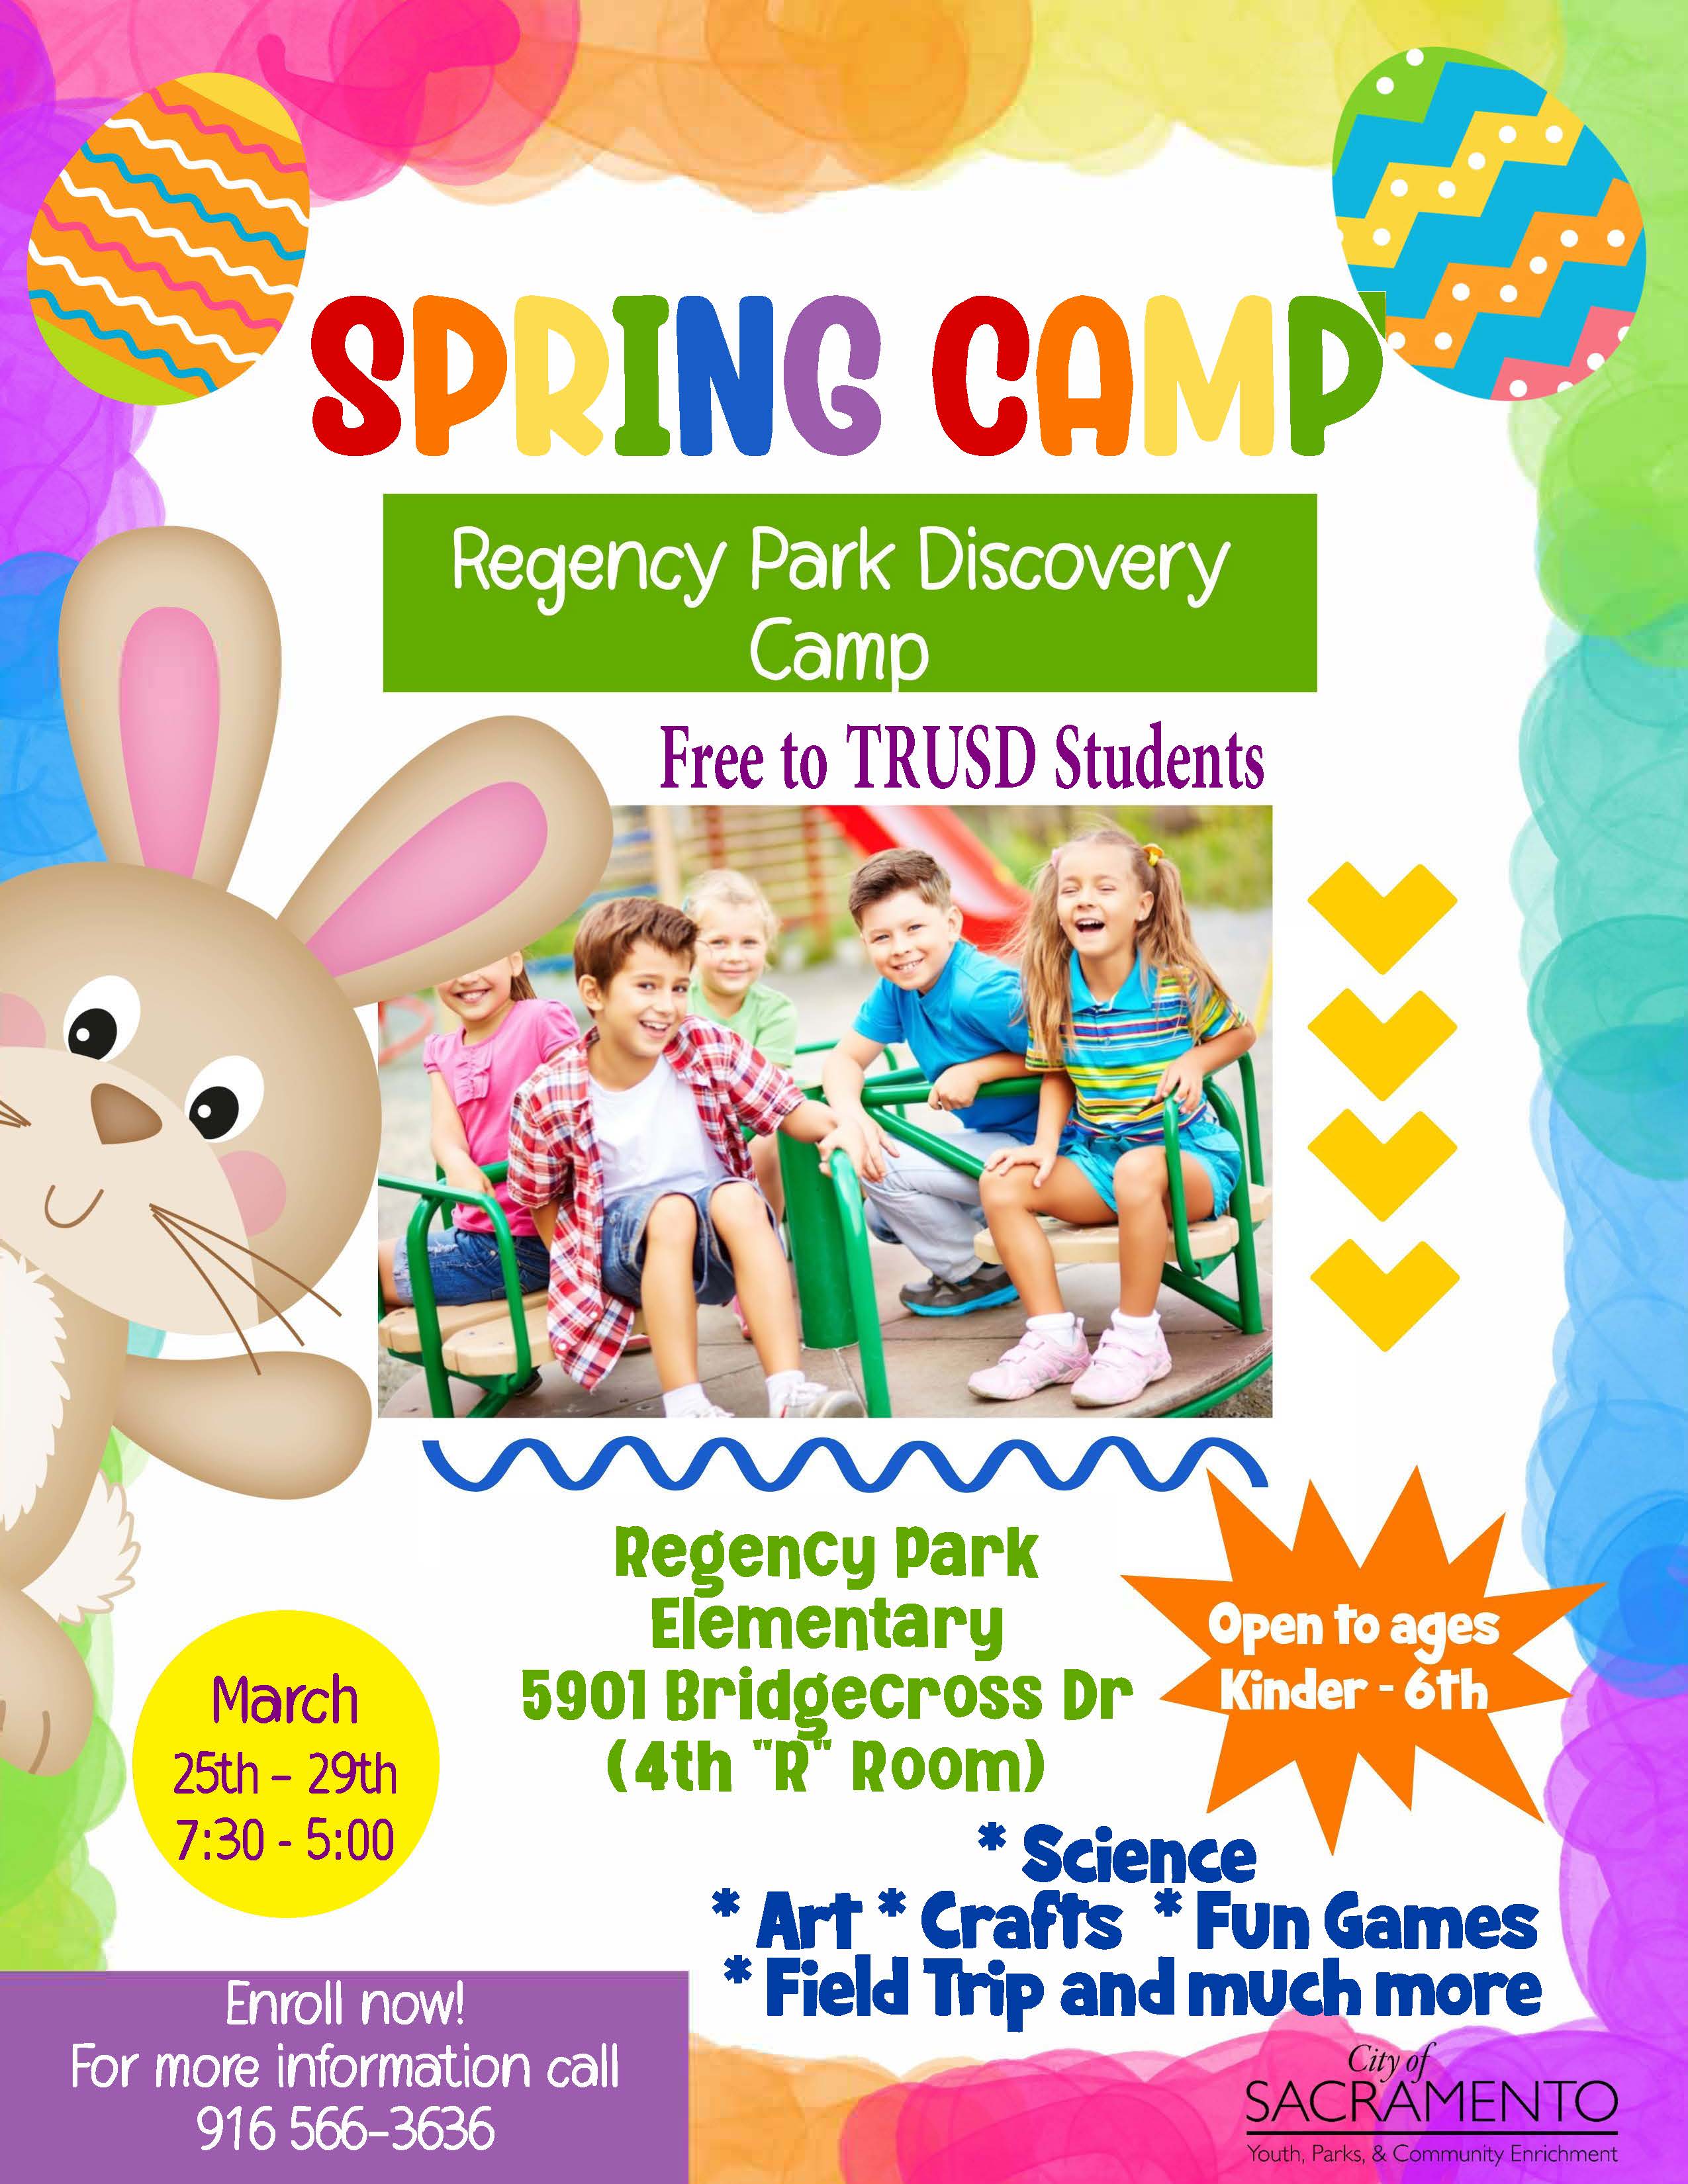 Regency Park Discovery Camp Flyer. March 25th - 29th. 7:30 am to 5:00 pm. Register Below. Call 916-566-3636 for more information.